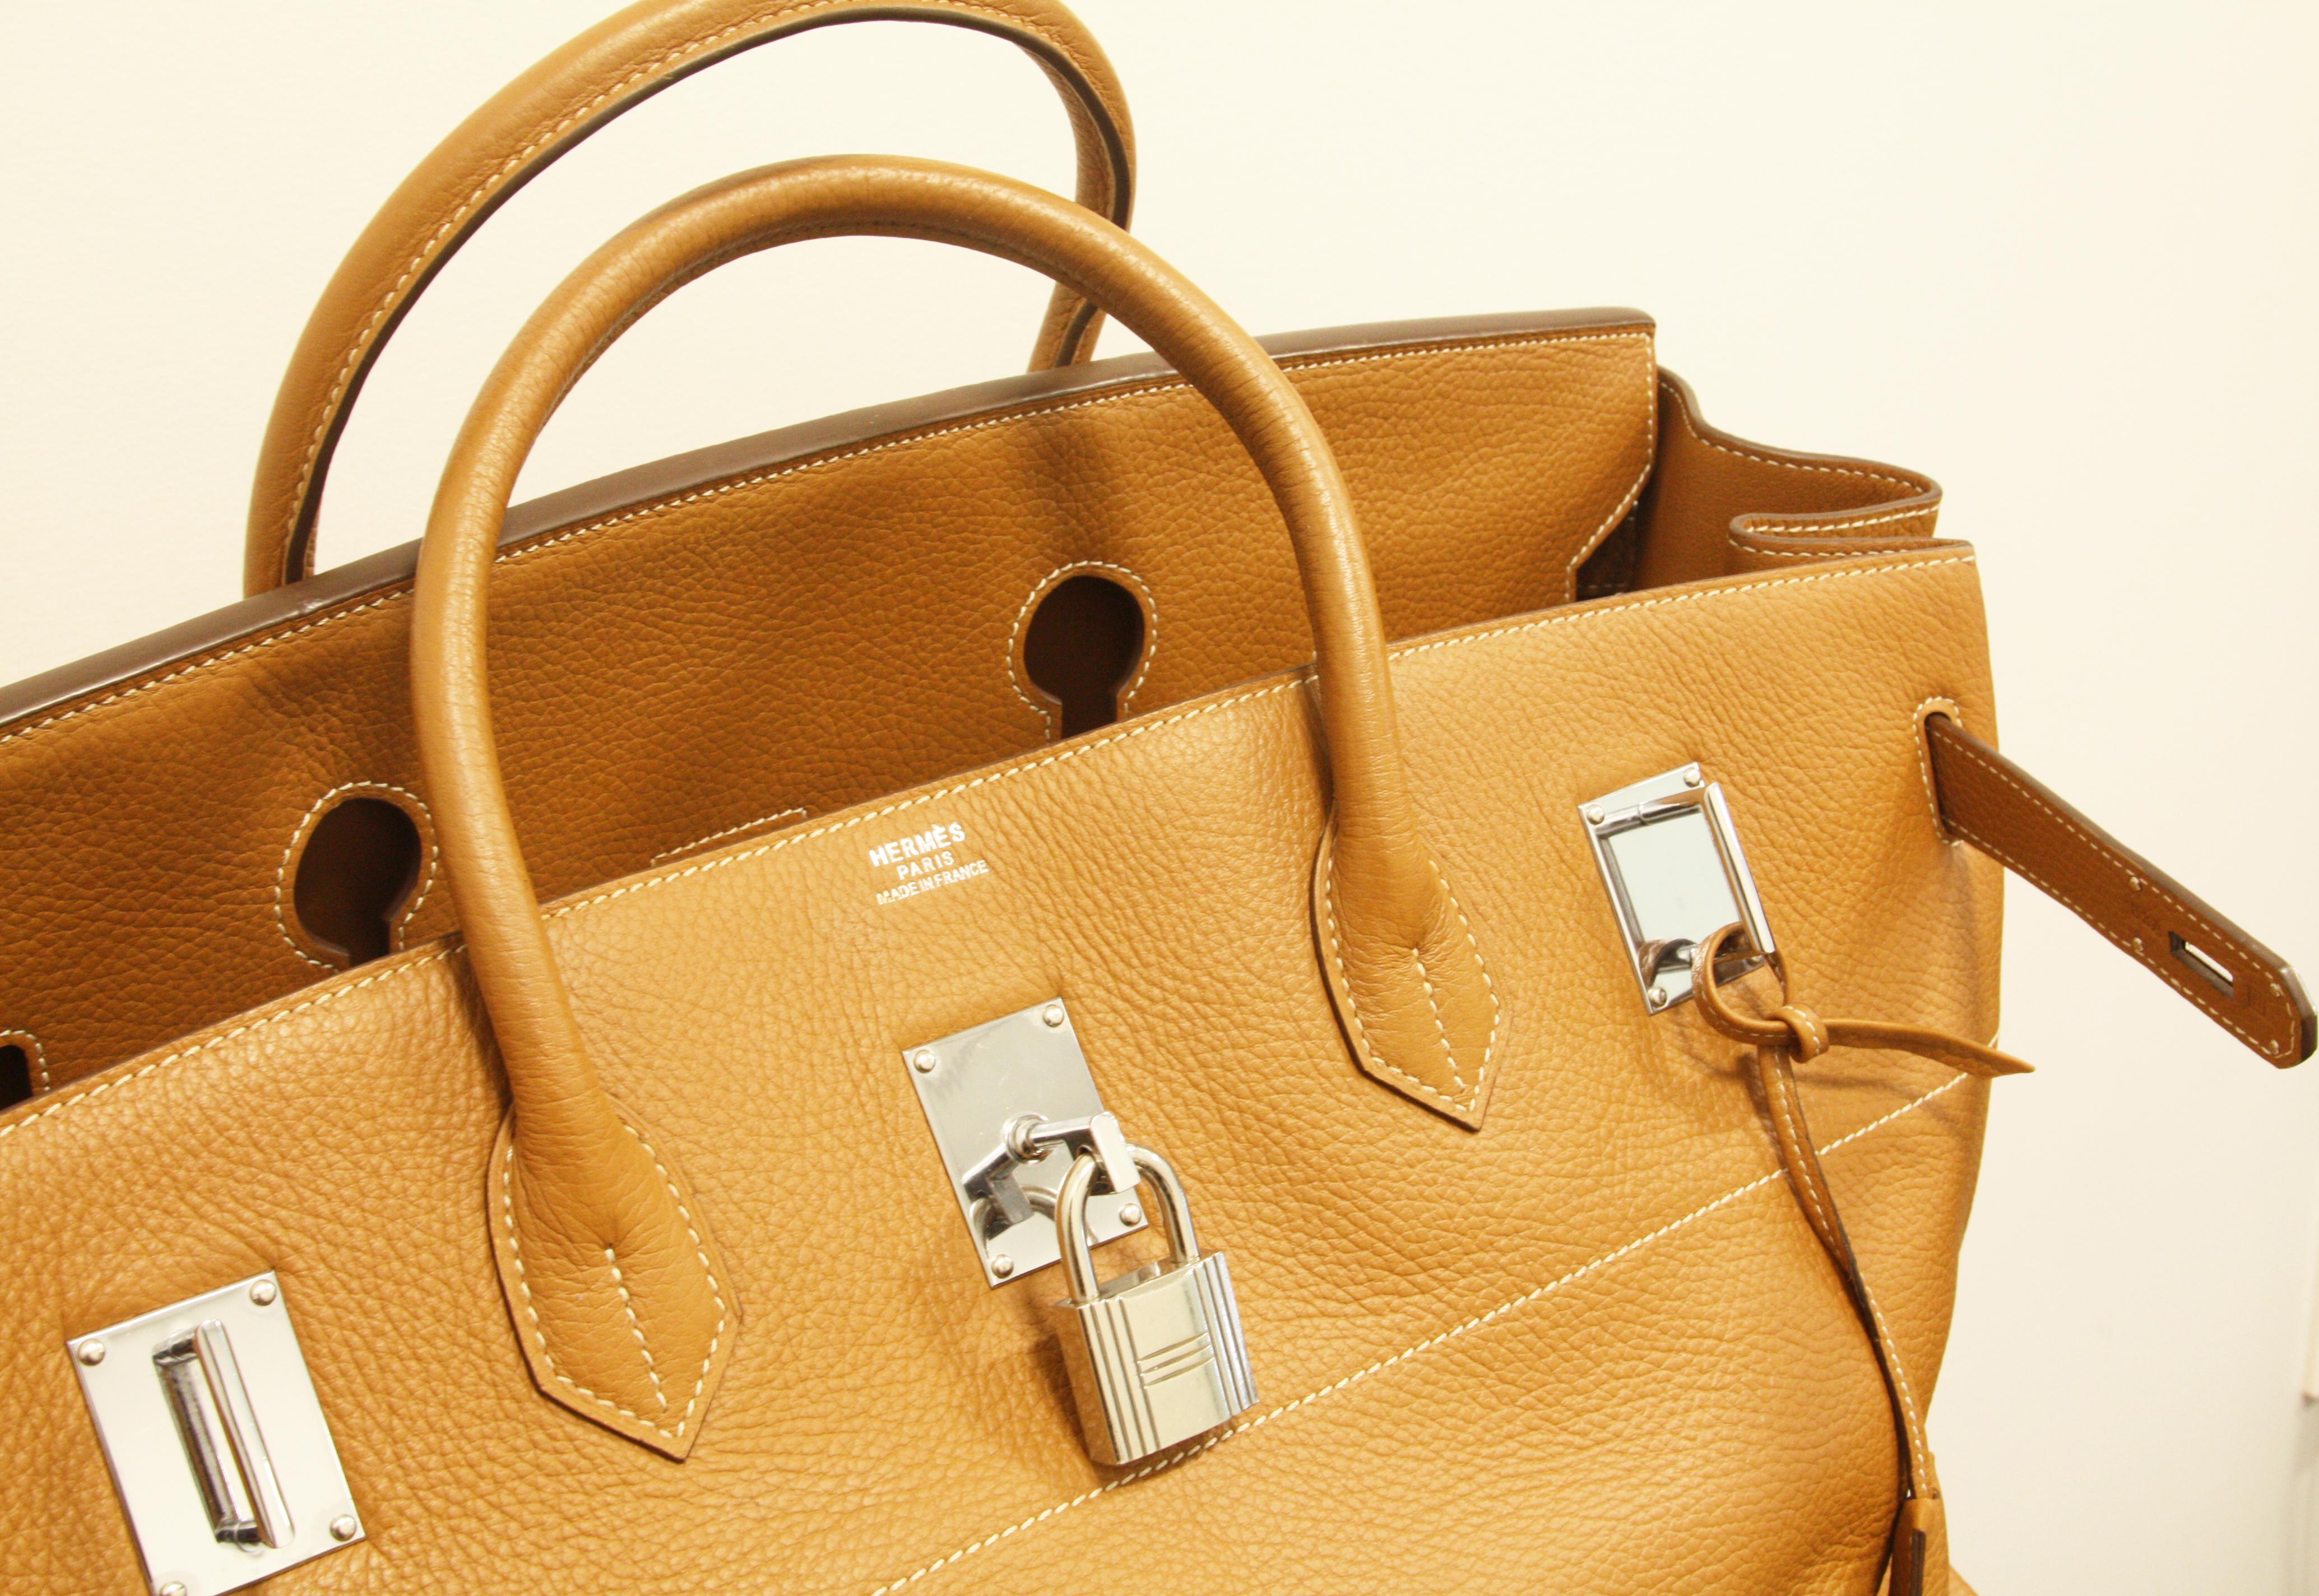 Hermès Birkin 50cm Brown Togo Leather Tote In Excellent Condition For Sale In New York, NY